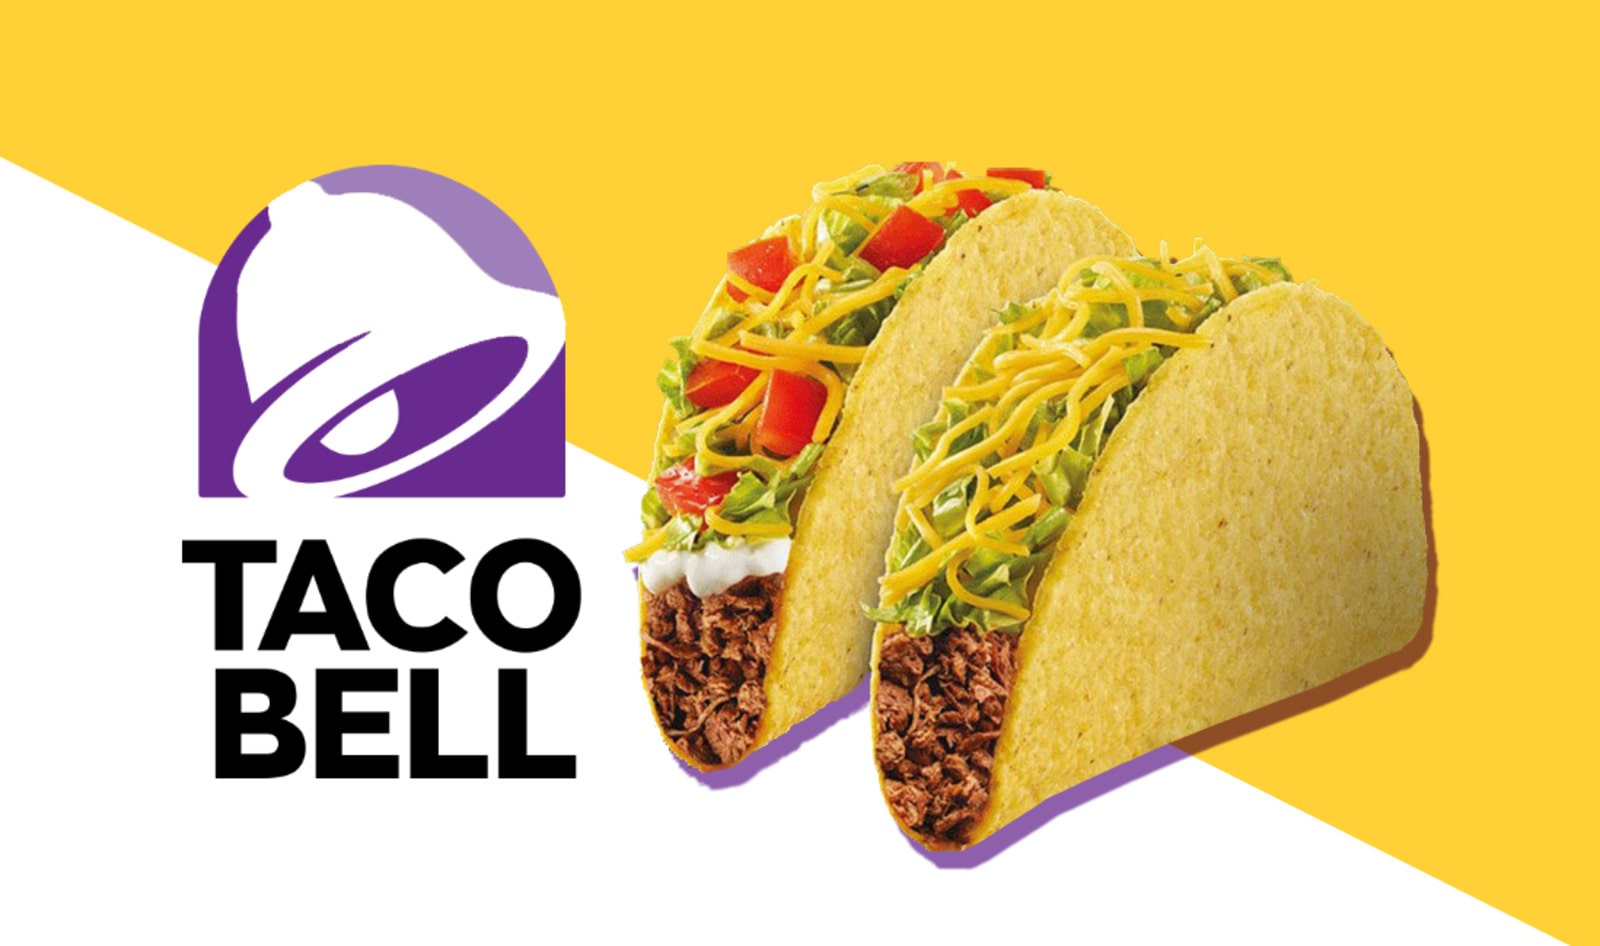 Taco Bell Finally Adds Vegan Meat to Menu … But There’s a Catch